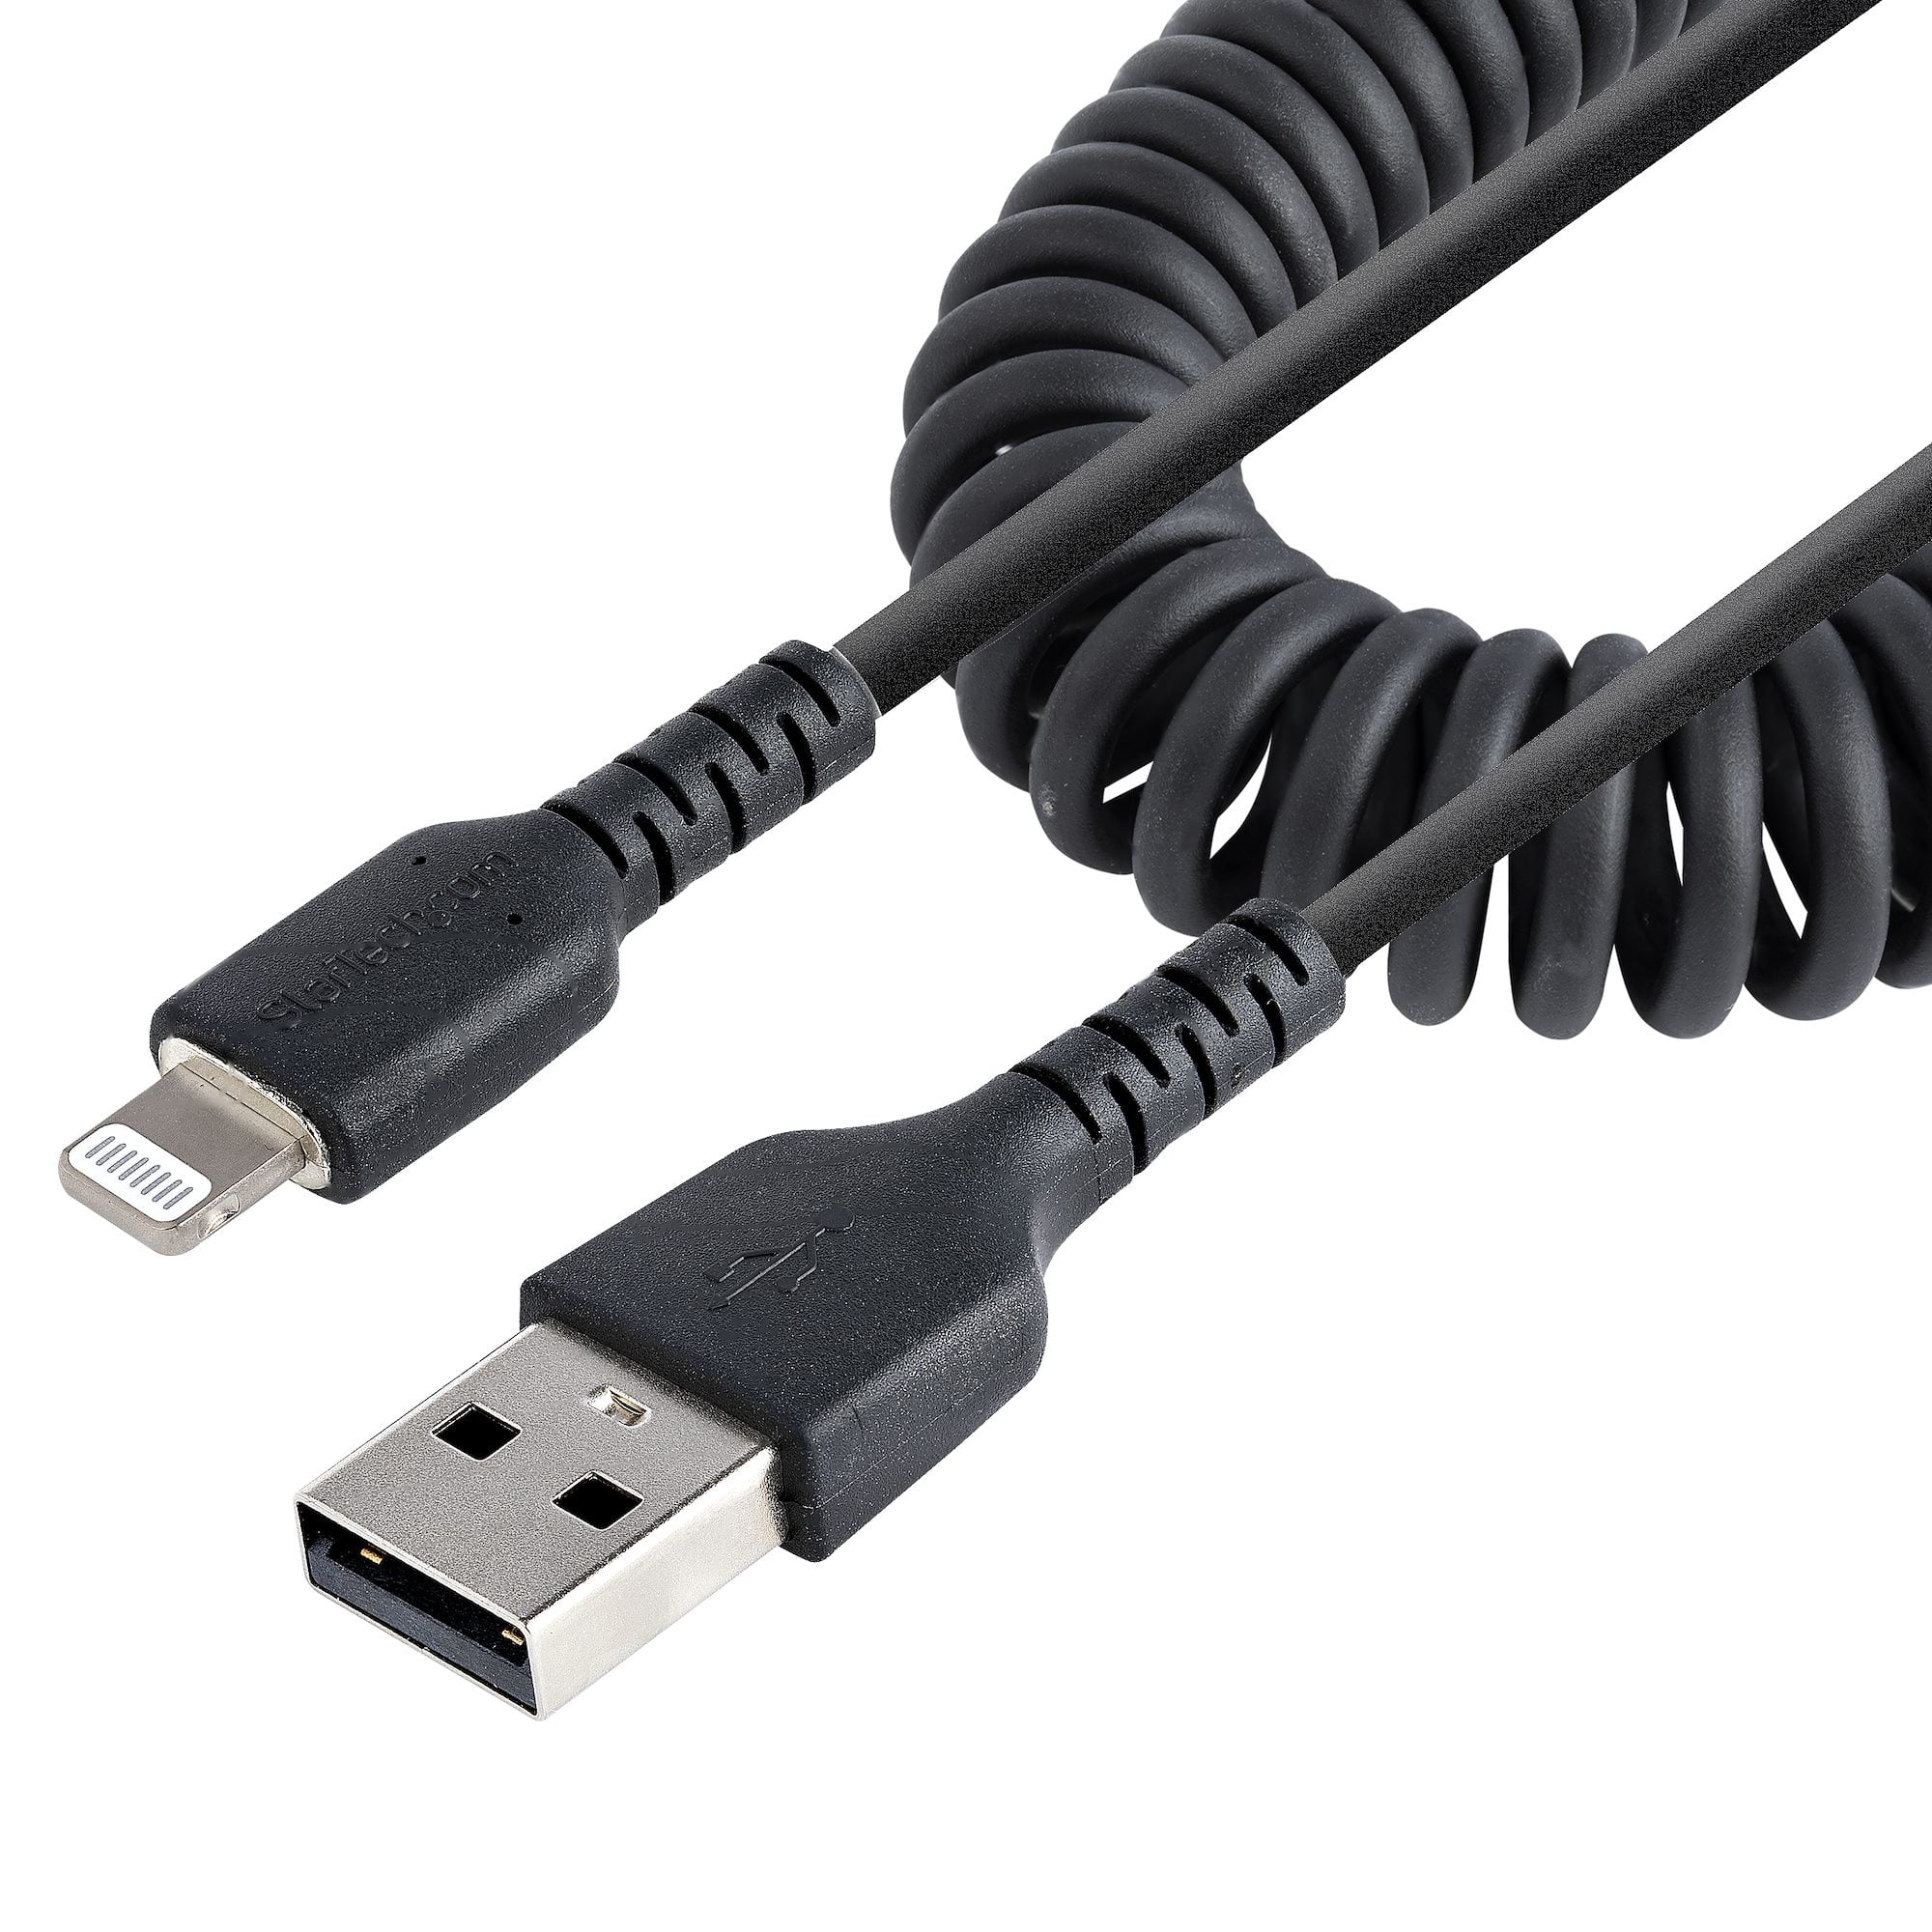 (3ft) Usb To Cable, Mfi Certified, Coiled Iphone Cable, Black, Durable And Flexible Tpe Jacket Aramid Fiber, Heavy Duty Coil Cable - Rugged Usb Lightning Cable Walmart.com